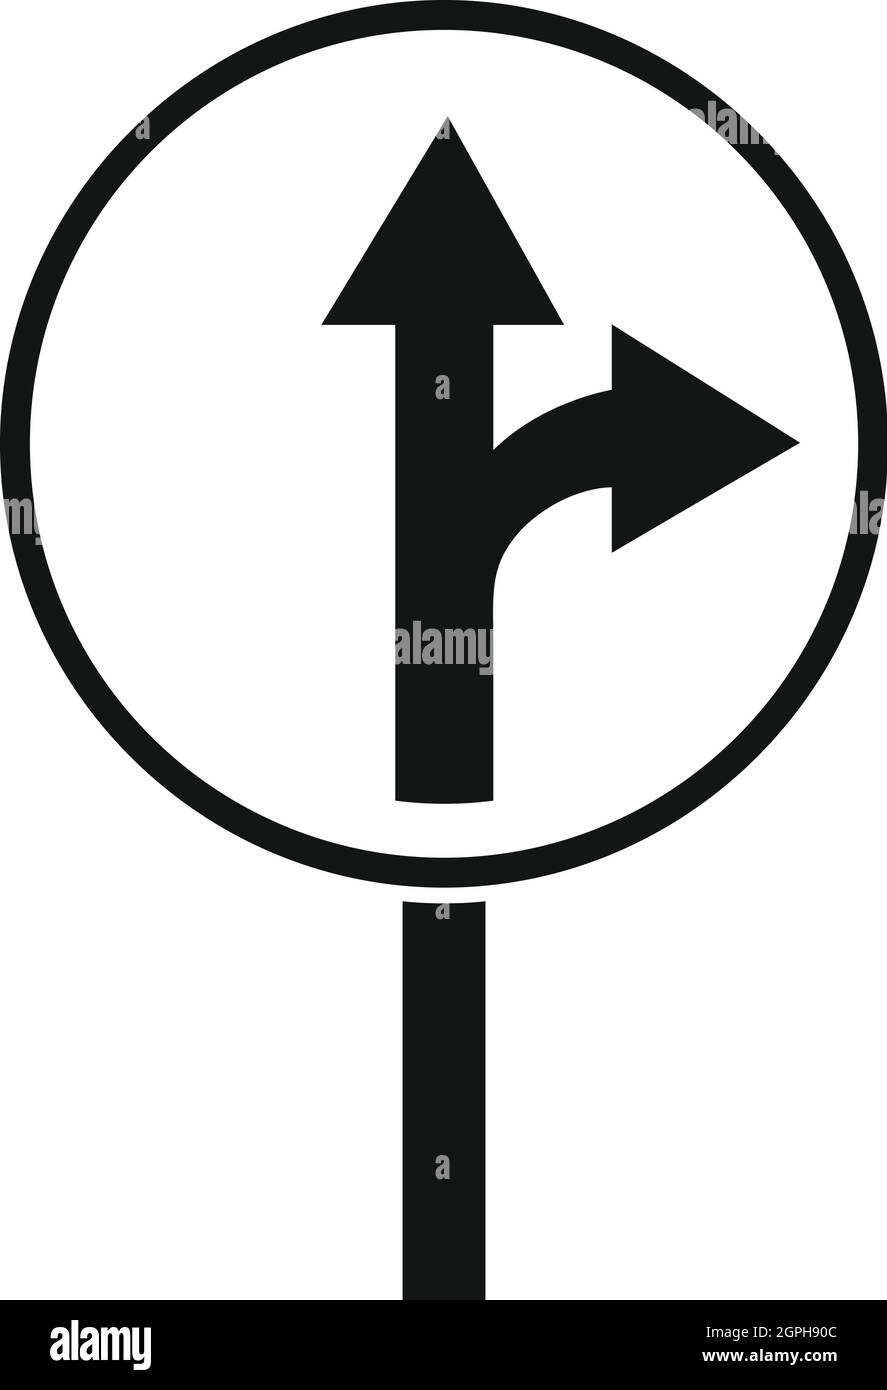 Straight or right turn ahead road sign icon Stock Vector